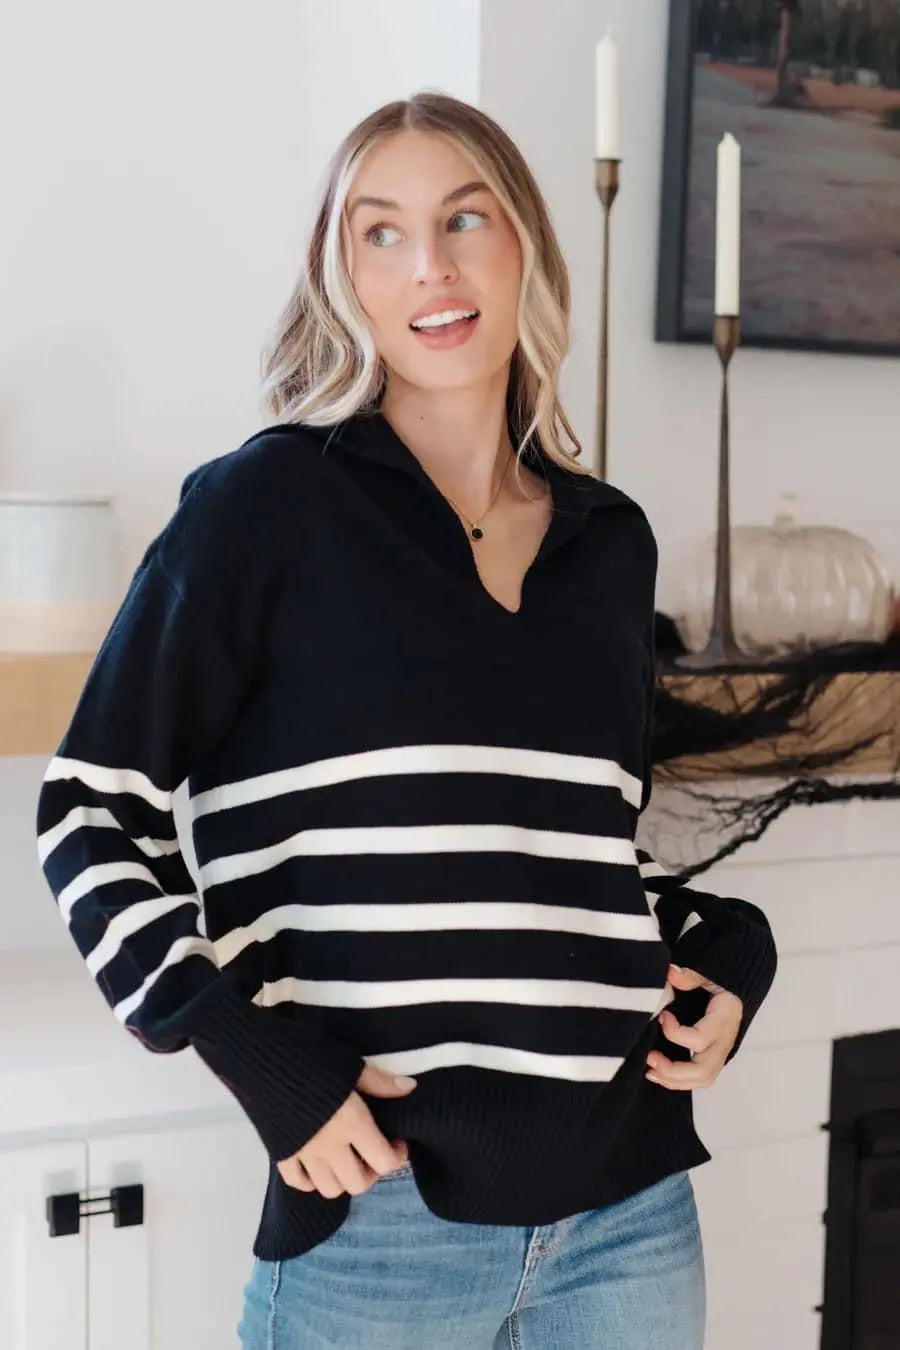 From Here On Out Striped Sweater-Styled by Steph-Styled by Steph-Women's Fashion Clothing Boutique, Indiana